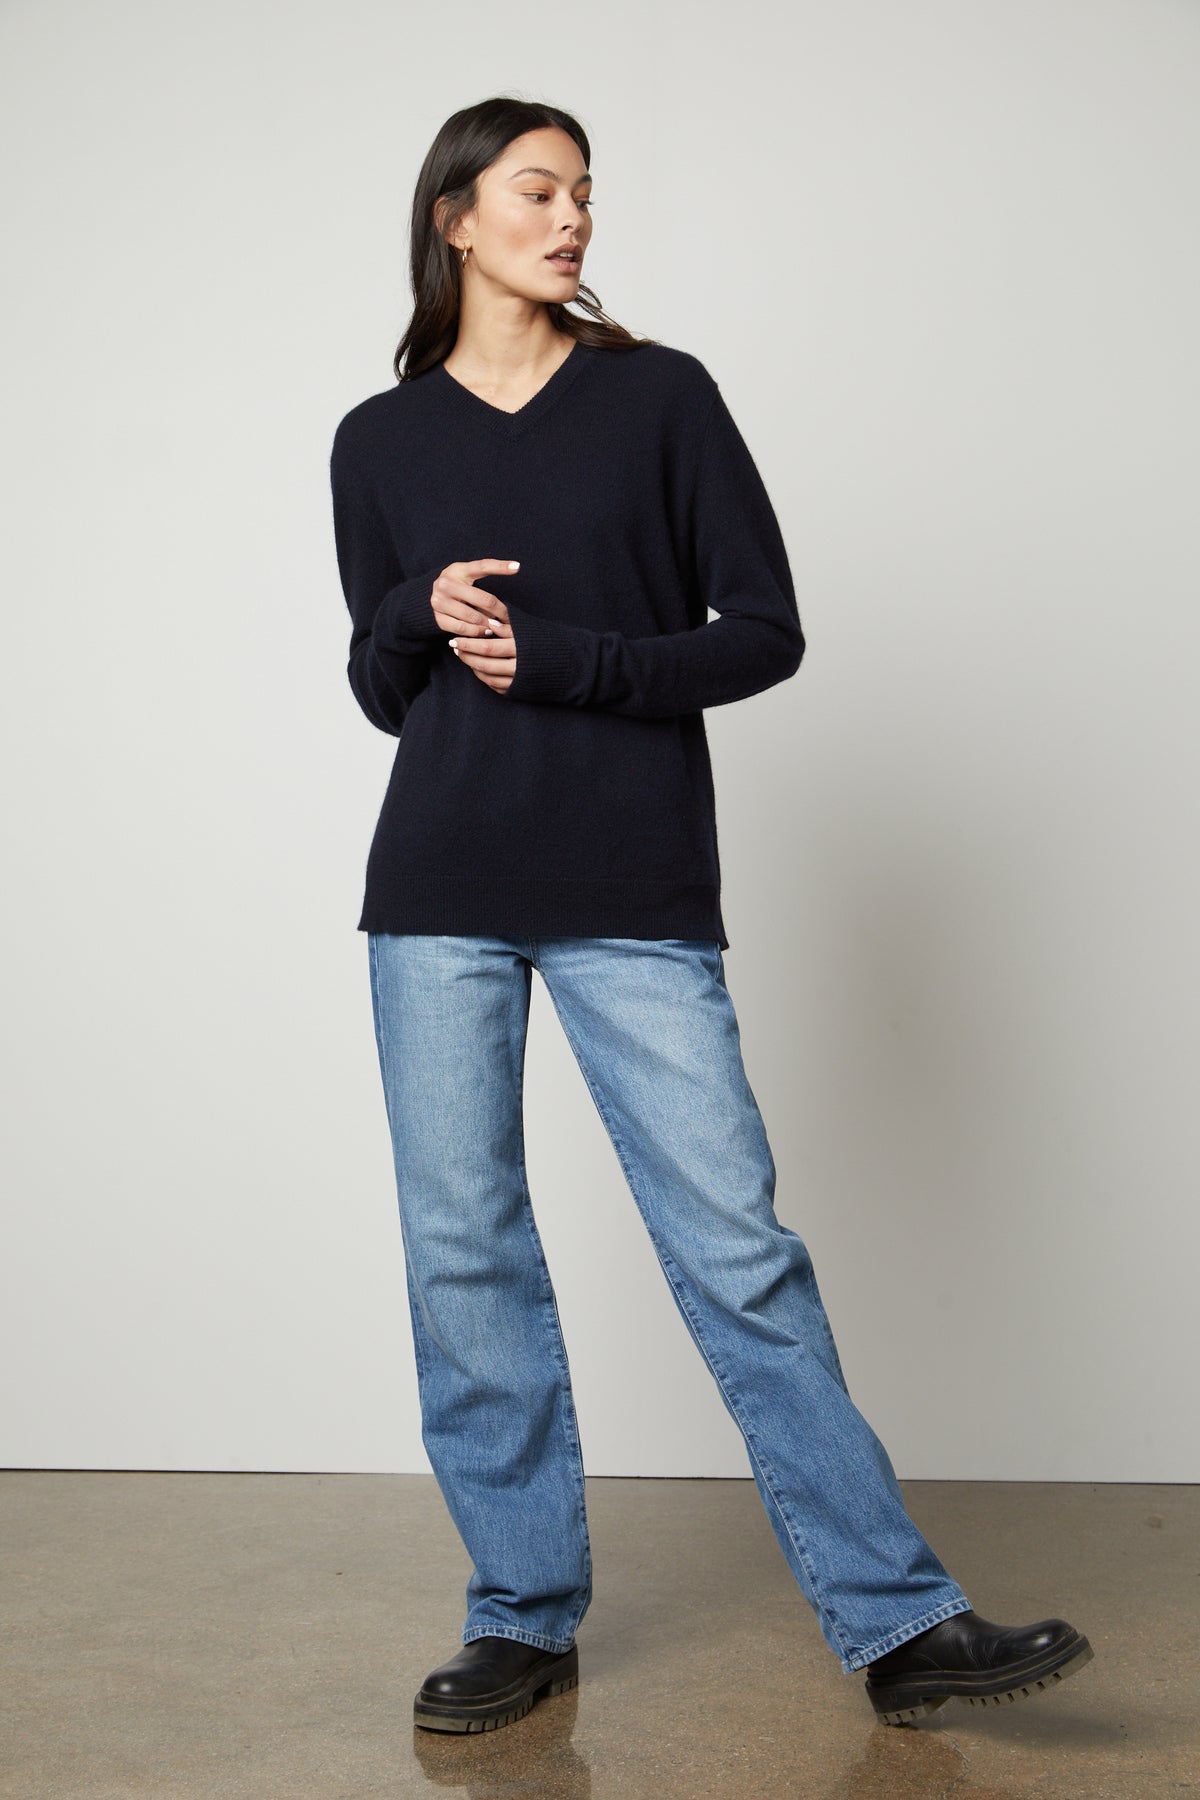   The model is wearing jeans and a Velvet by Graham & Spencer Harmony Cashmere V-Neck Sweater. 